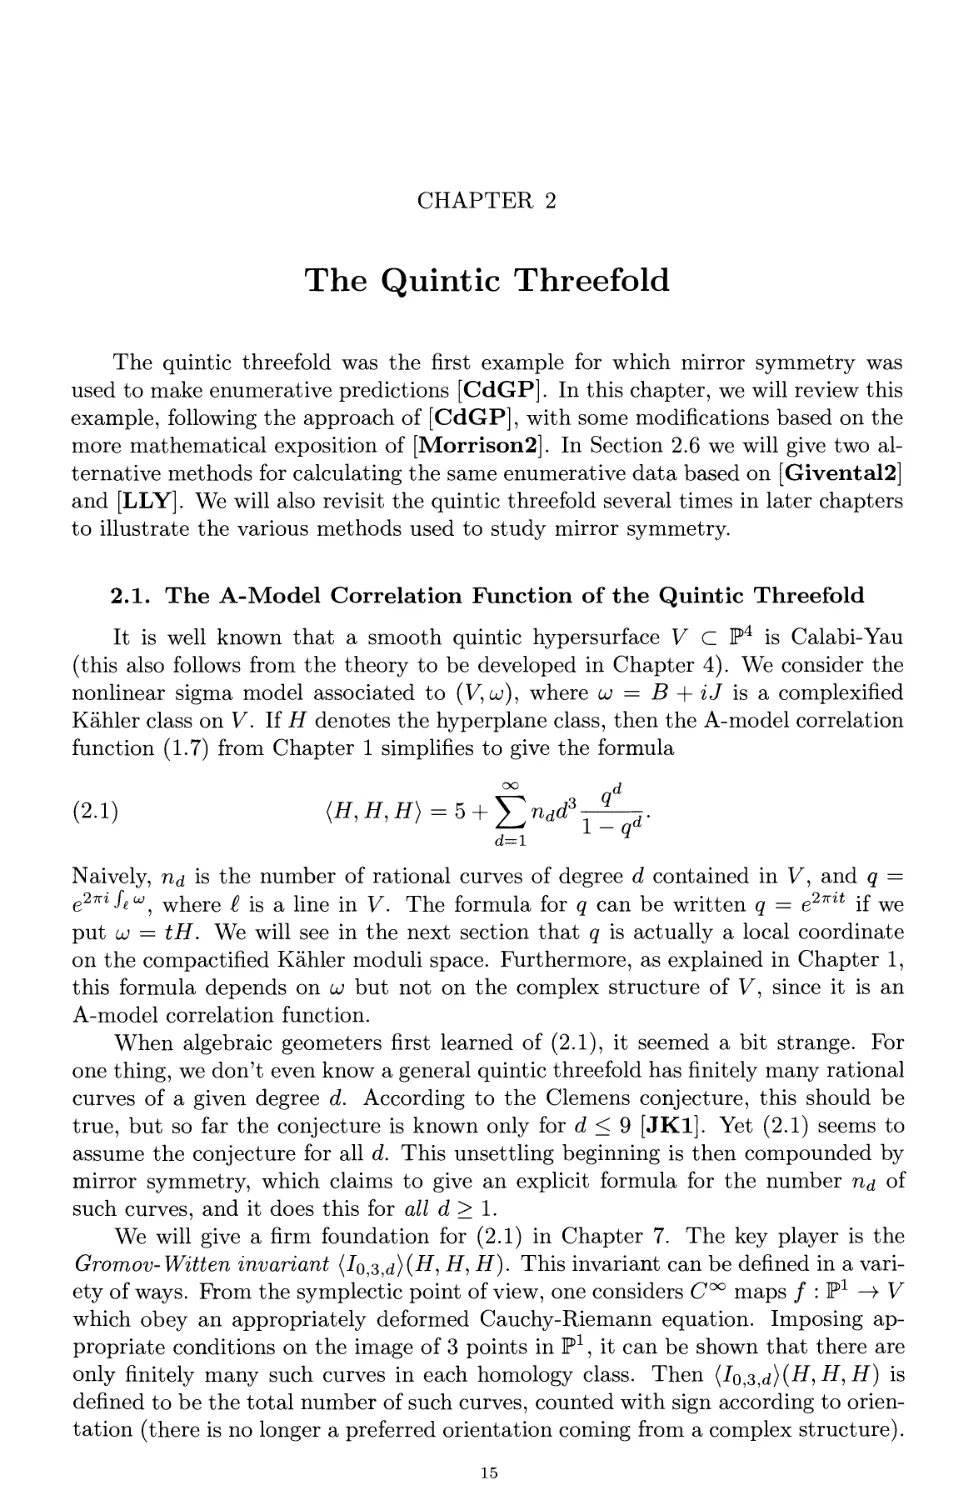 Chapter 2. The Quintic Threefold